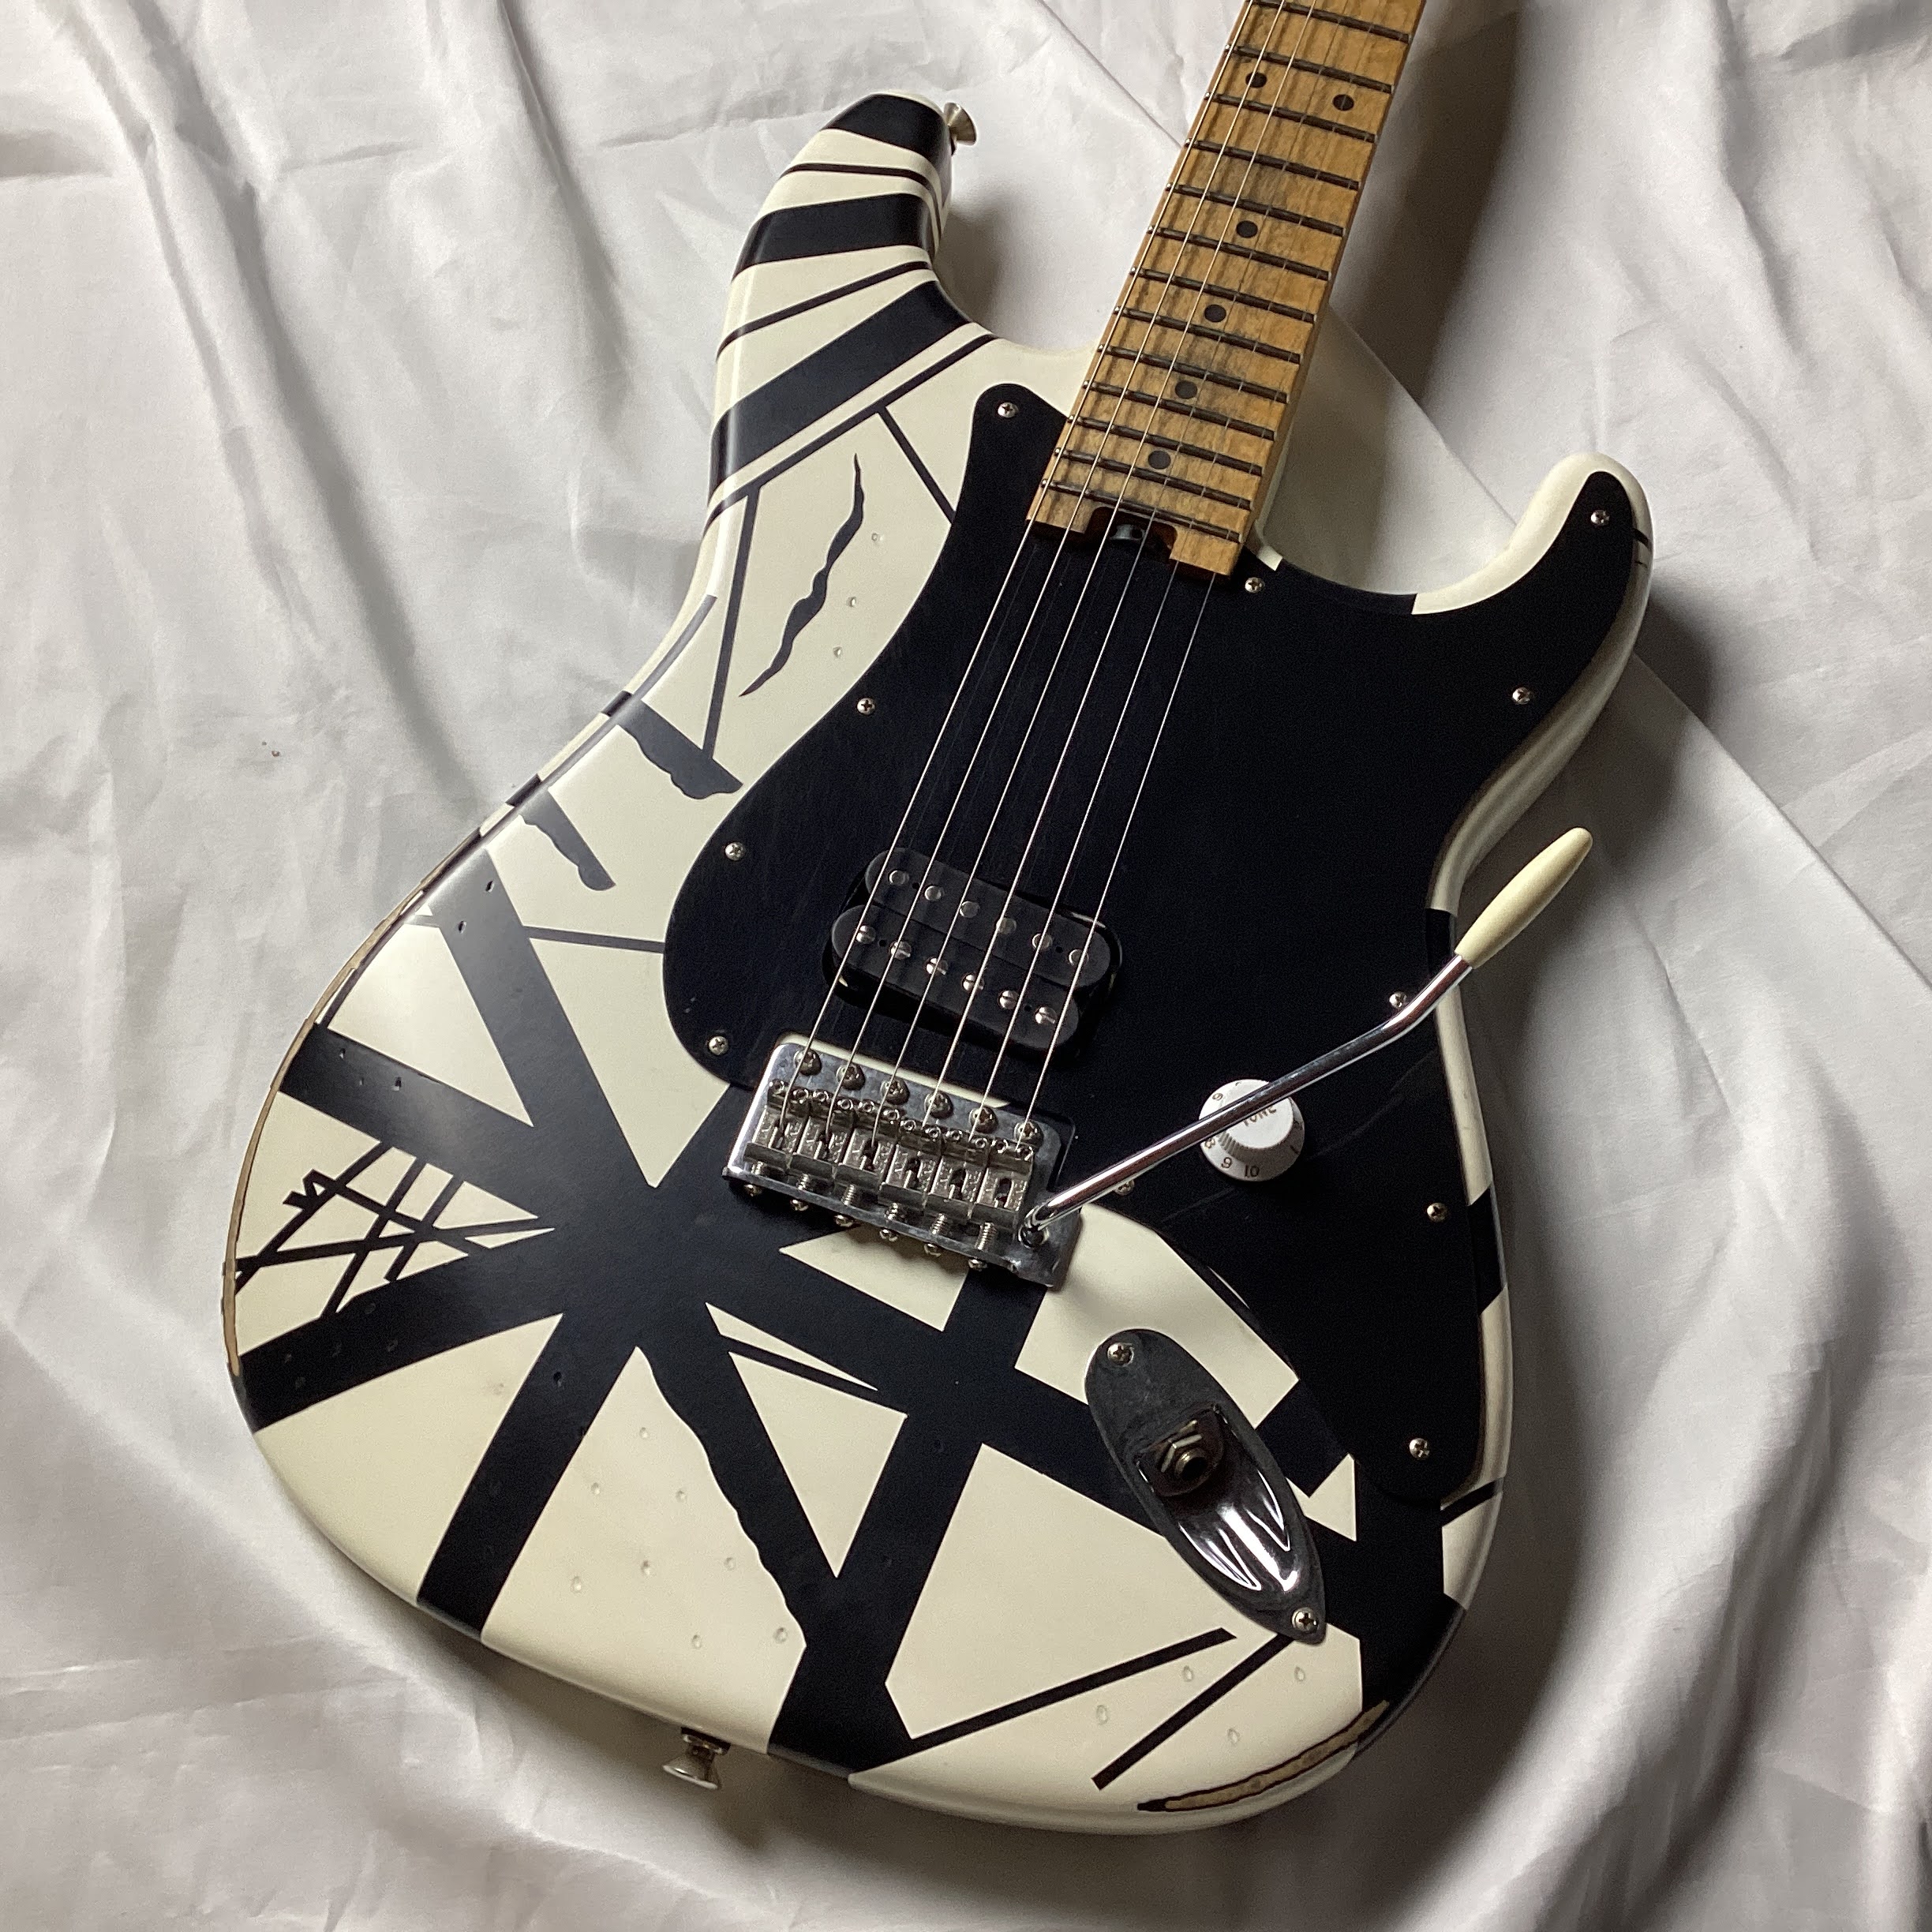 EVHStriped Series '78 Eruption Maple Fingerboard White with Black Stripes Relic